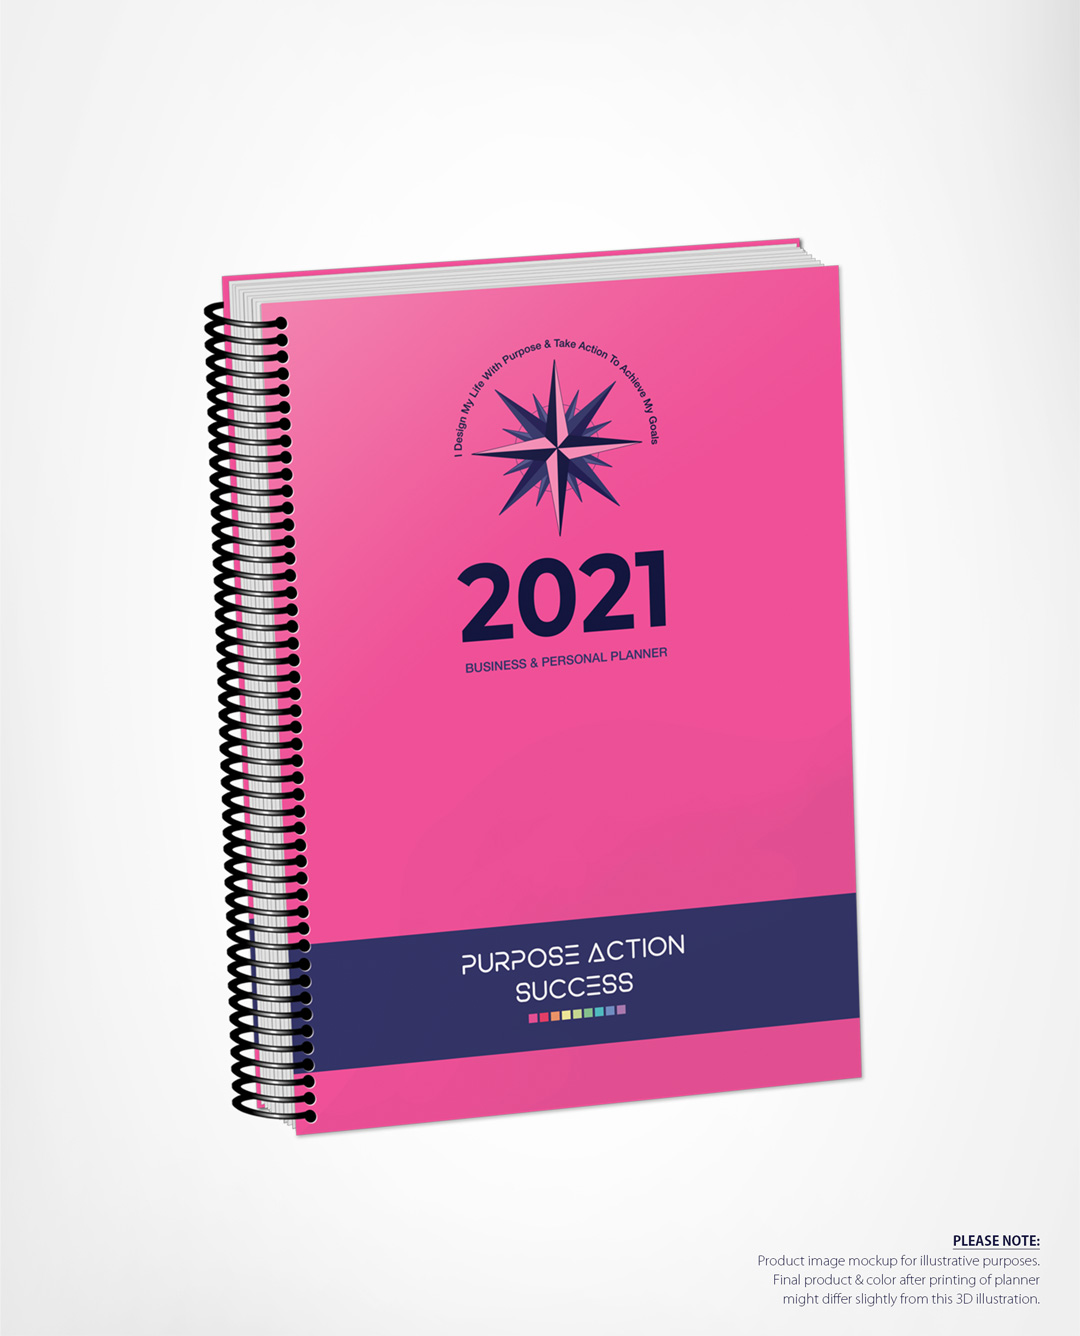 2021 MBS Business & Personal Planner - MBS Hot Pink Color